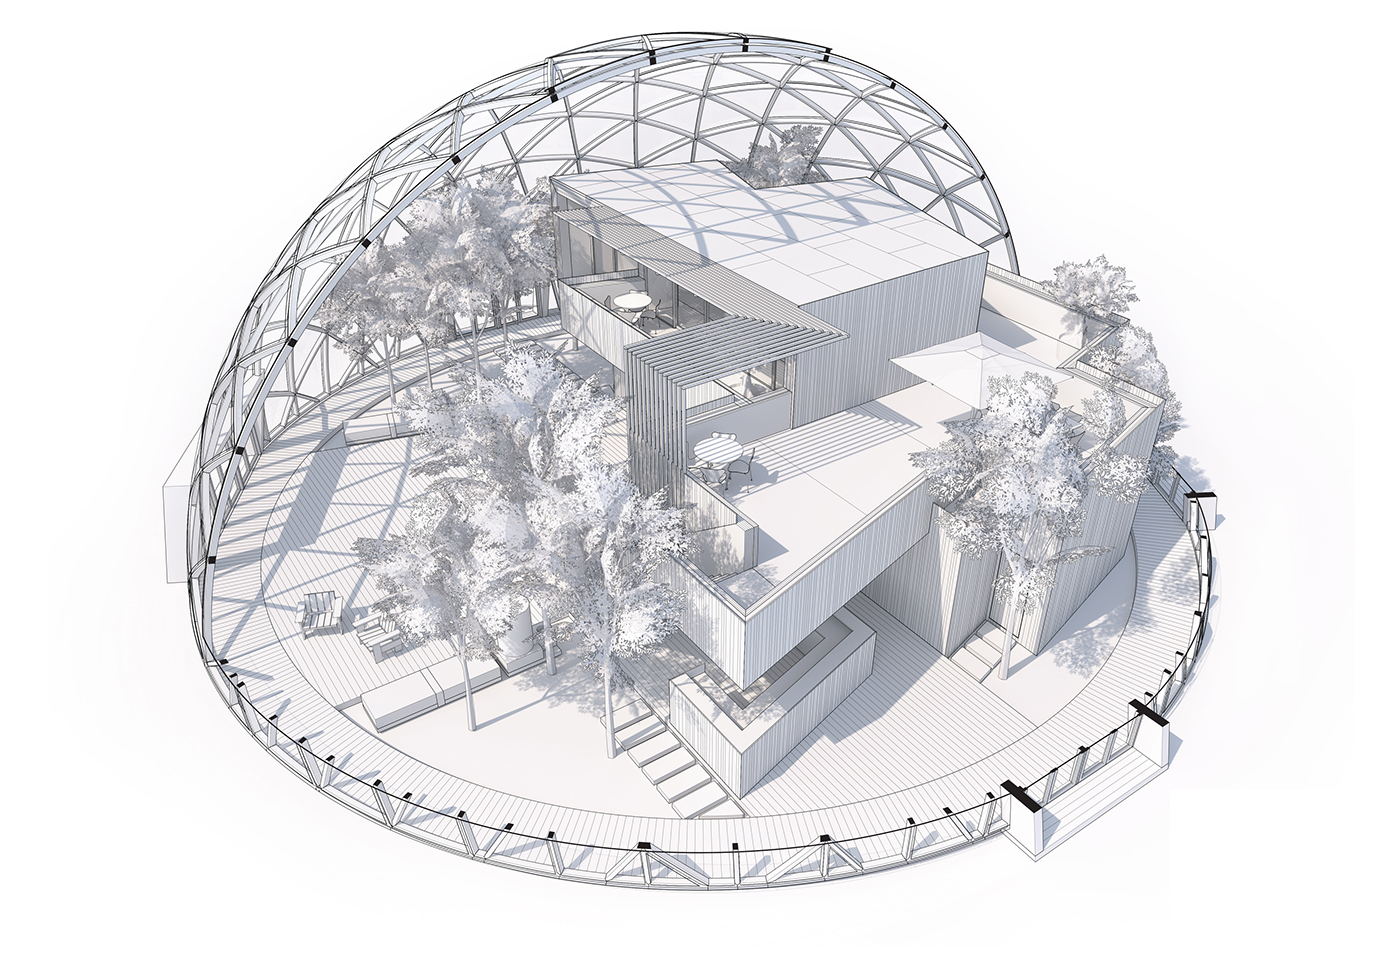 Geodesic dome greenhouse experiment cross laminated timber architecture